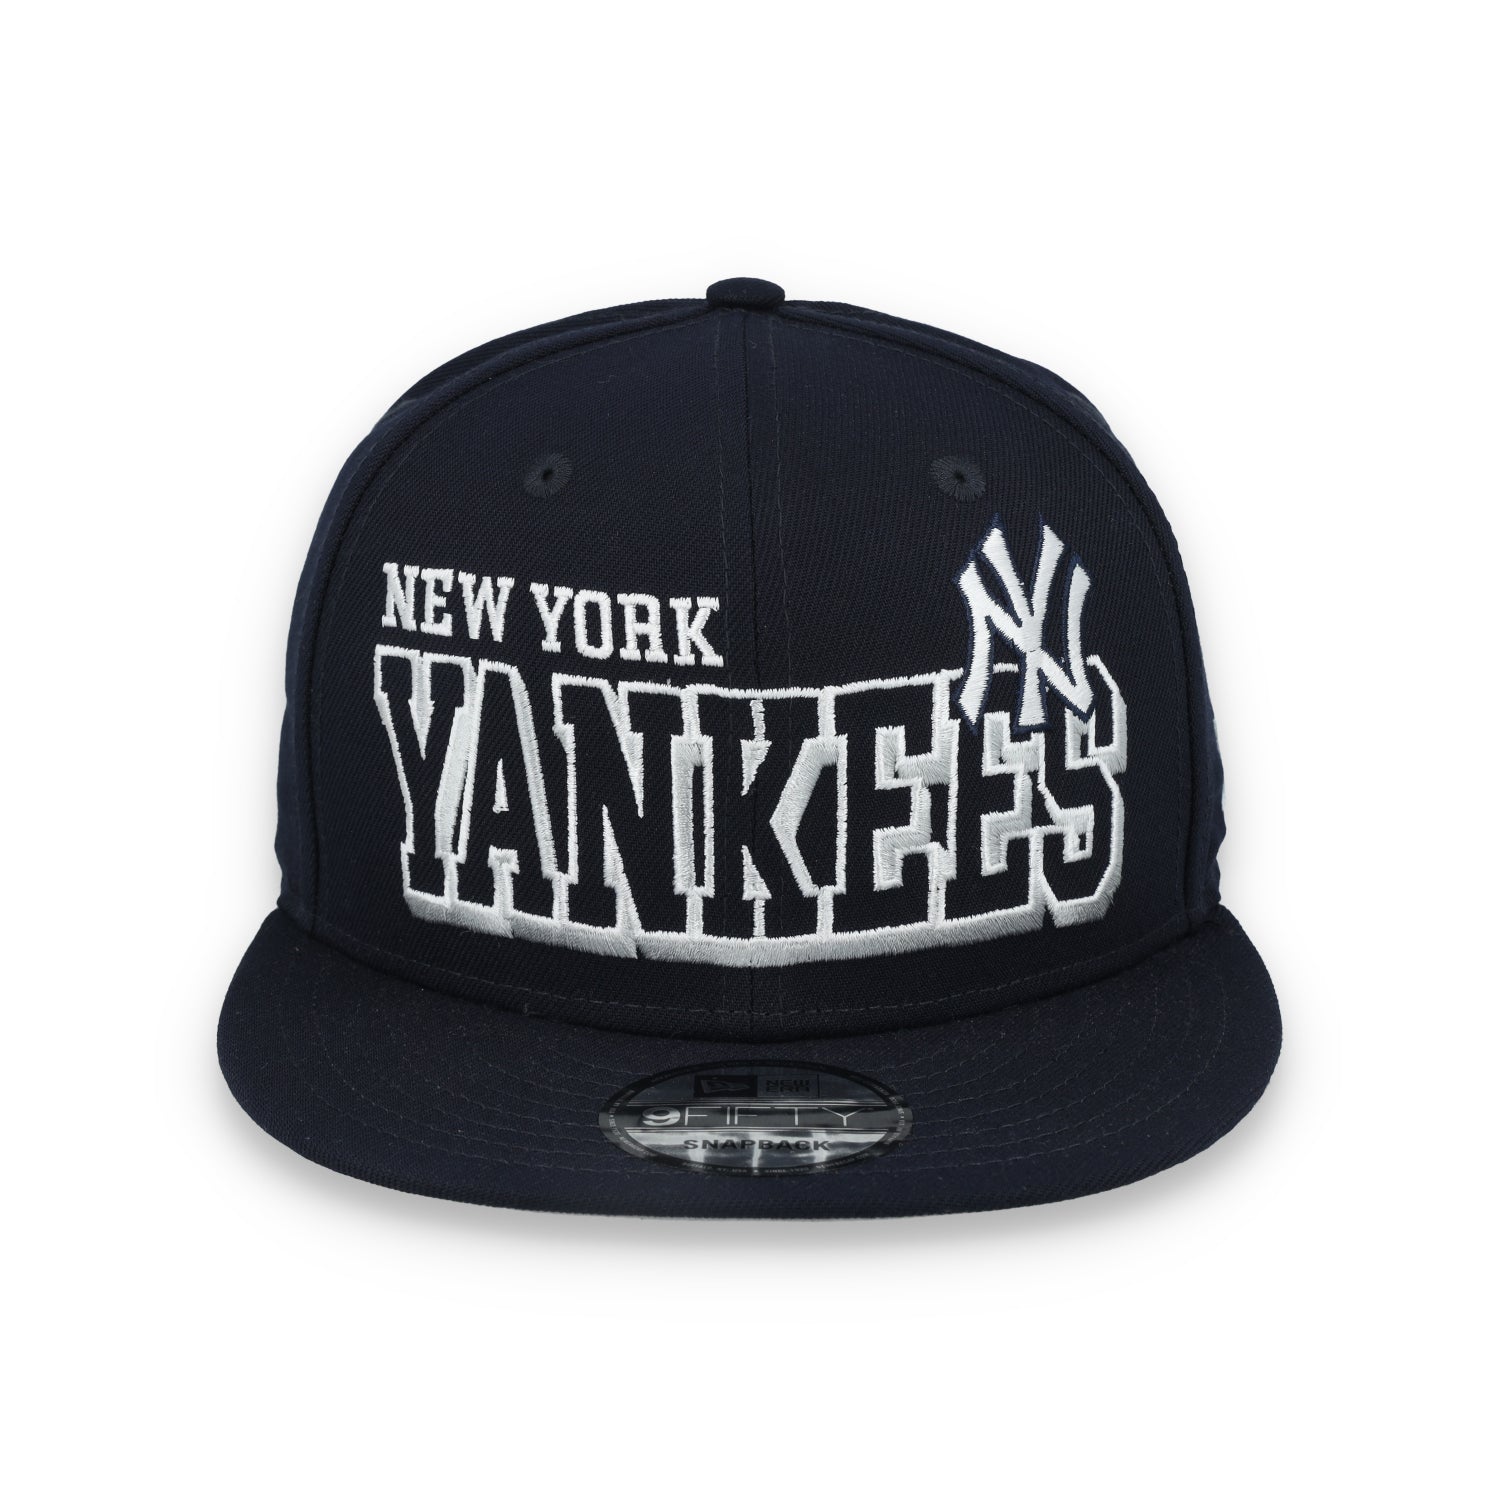 New Era New York Yankees Game Day 9FIFTY Snapback Hat